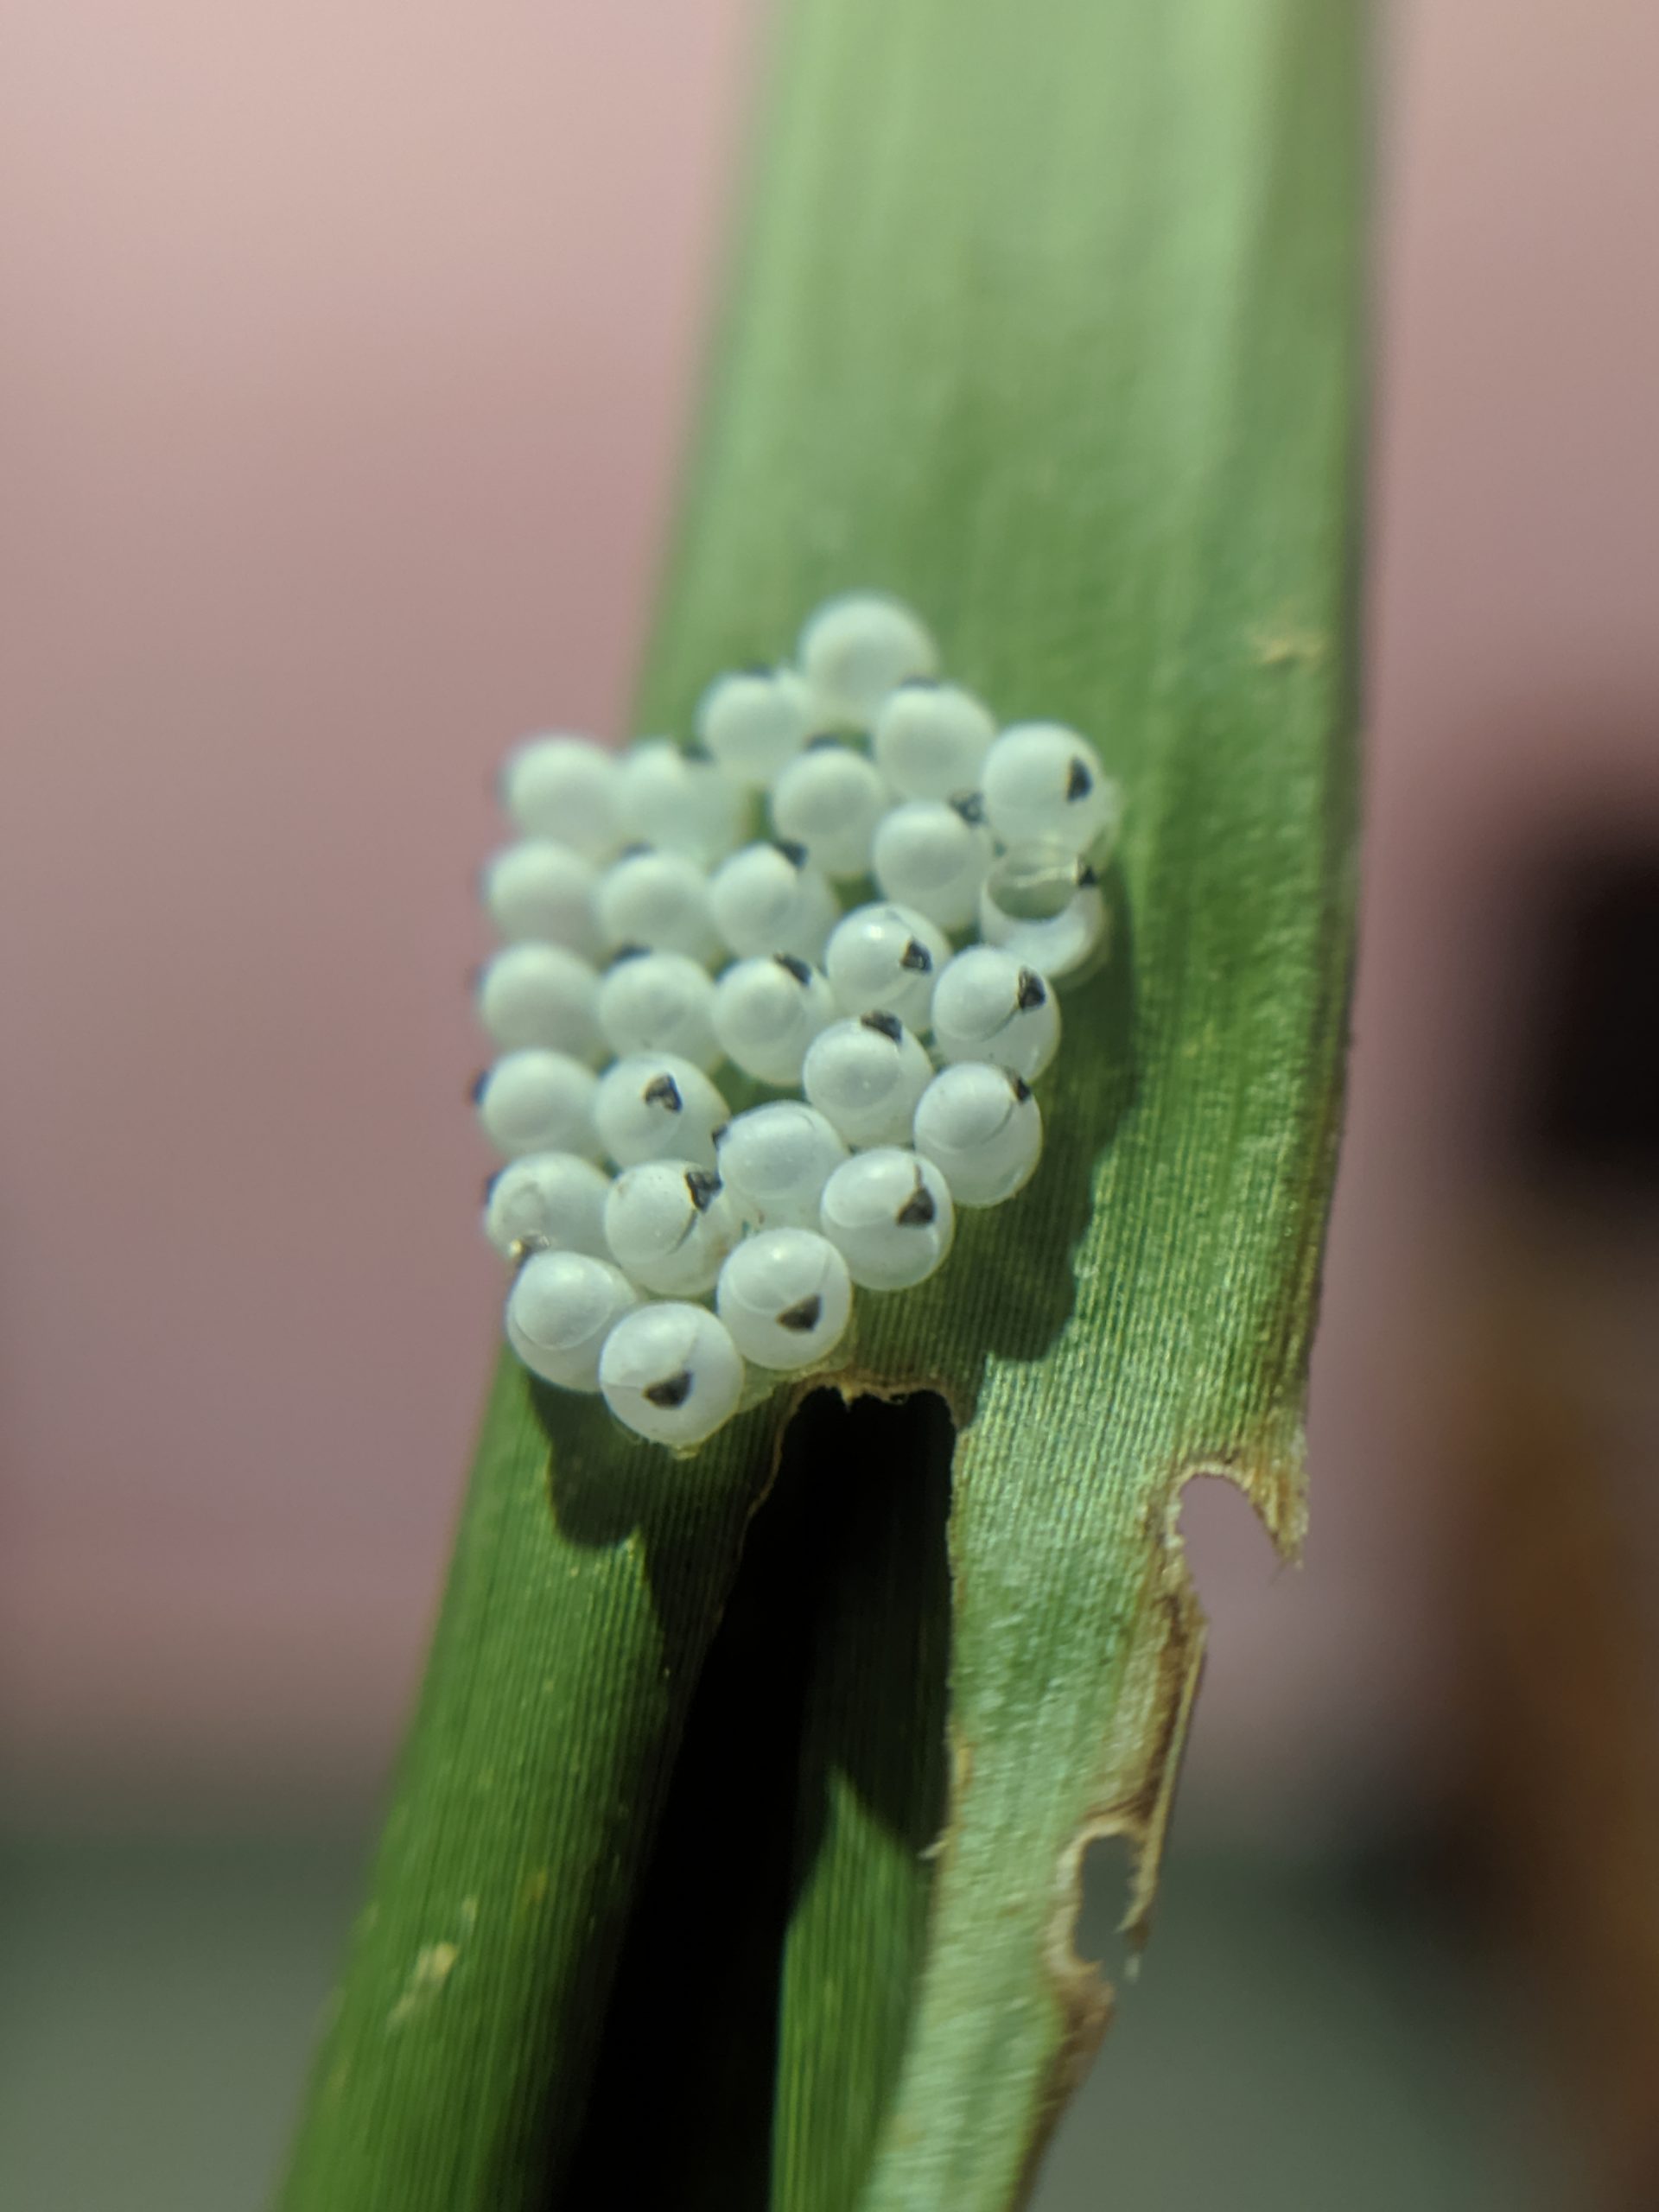 close-up of fly's eggs